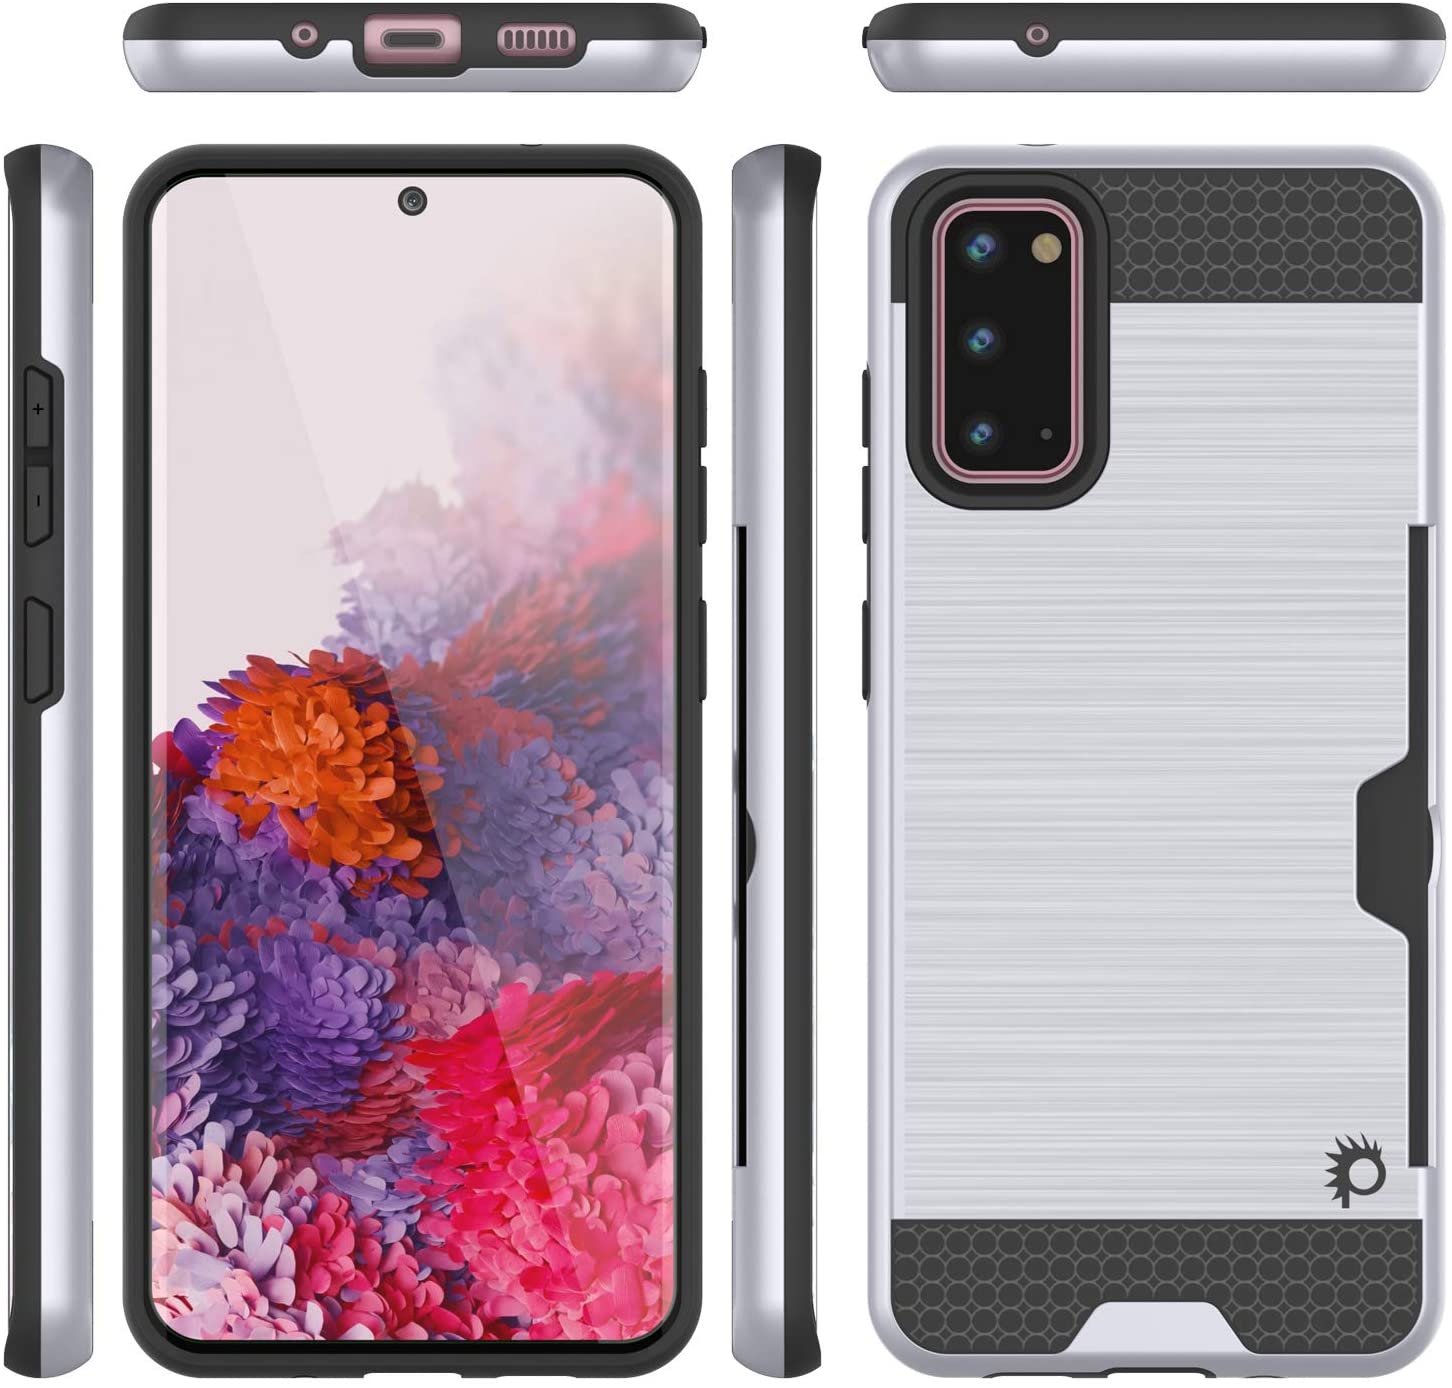 Galaxy S20 Case, PUNKcase [SLOT Series] [Slim Fit] Dual-Layer Armor Cover w/Integrated Anti-Shock System, Credit Card Slot [White]